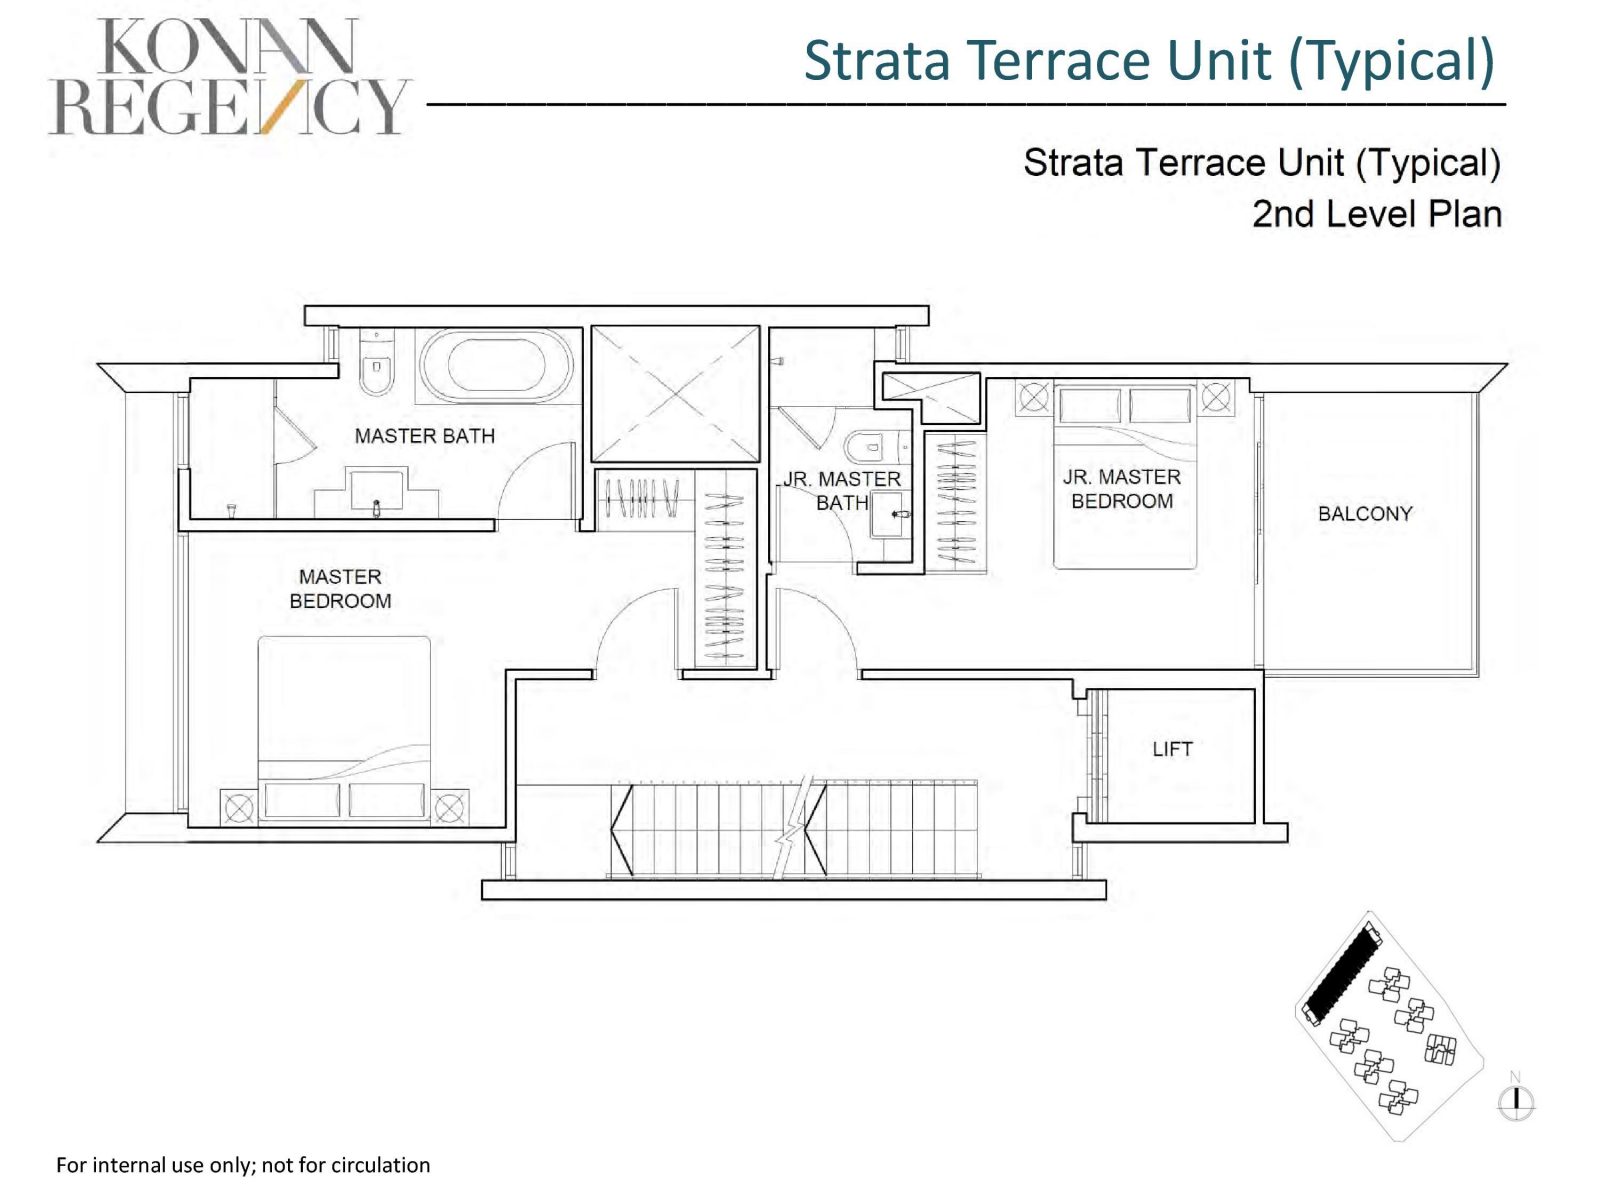 Strata Terrace Typical 5